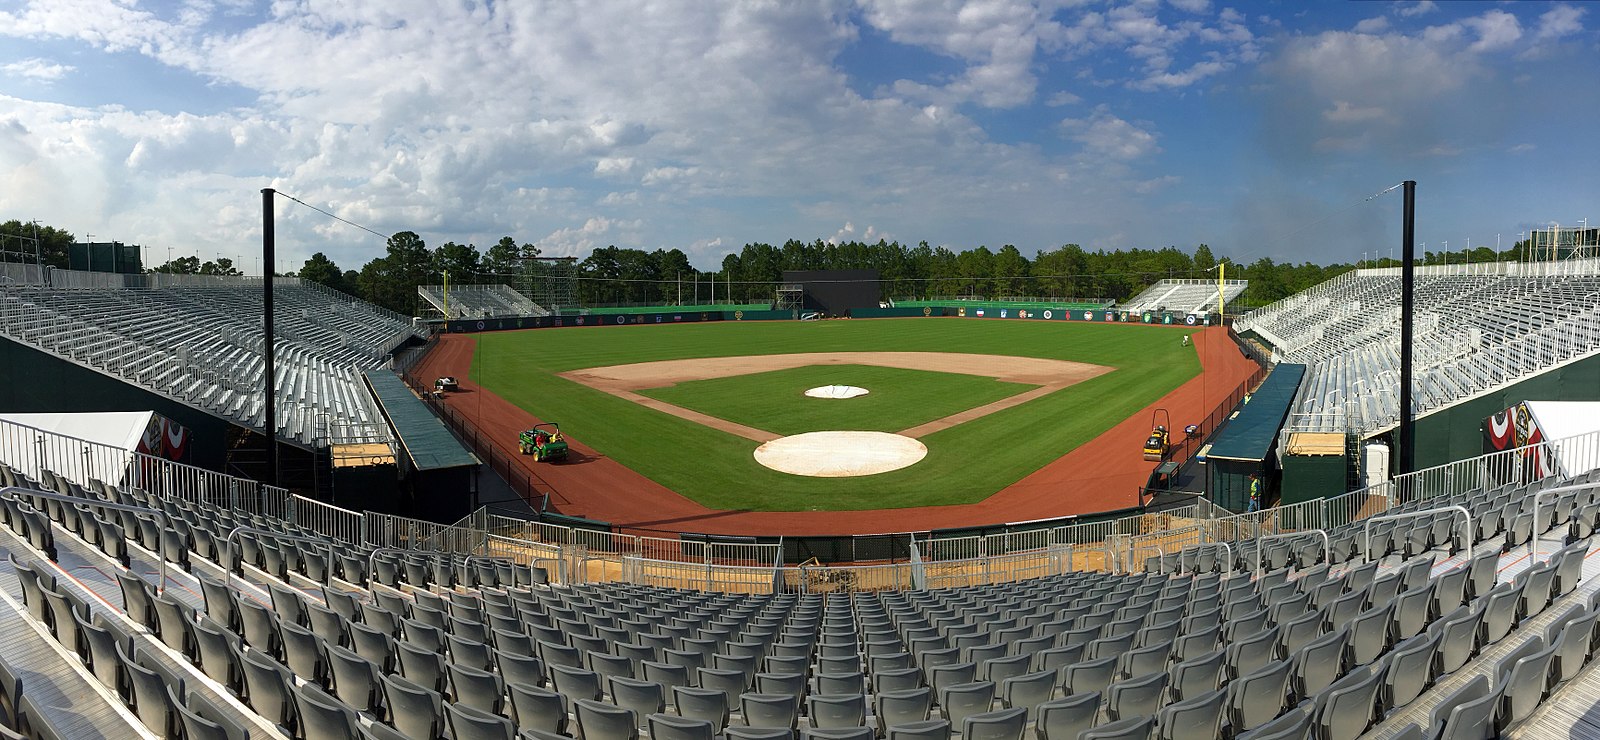 Fort Bragg Field, which was constructed by MLB and the MLBPA,will have a ca...